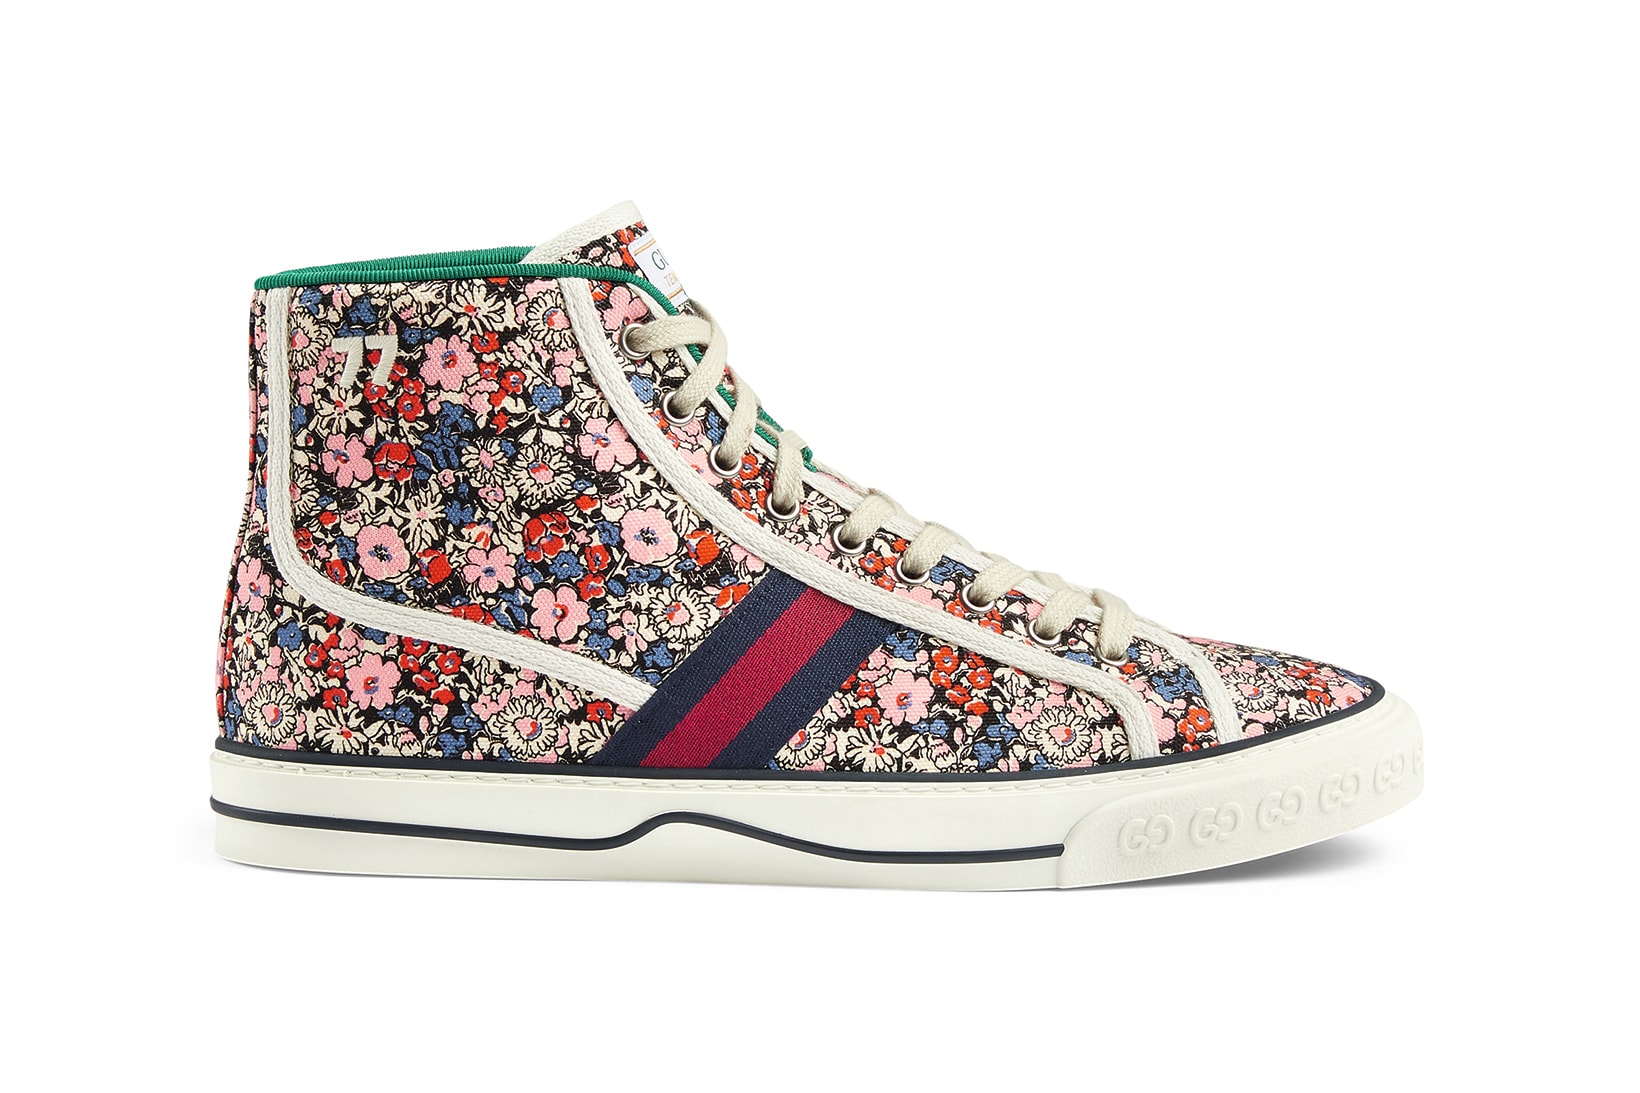 Liberty London x Gucci Collaboration Fall/Winter 2020 Collection Puffer Jacket Sneakers High Top Black